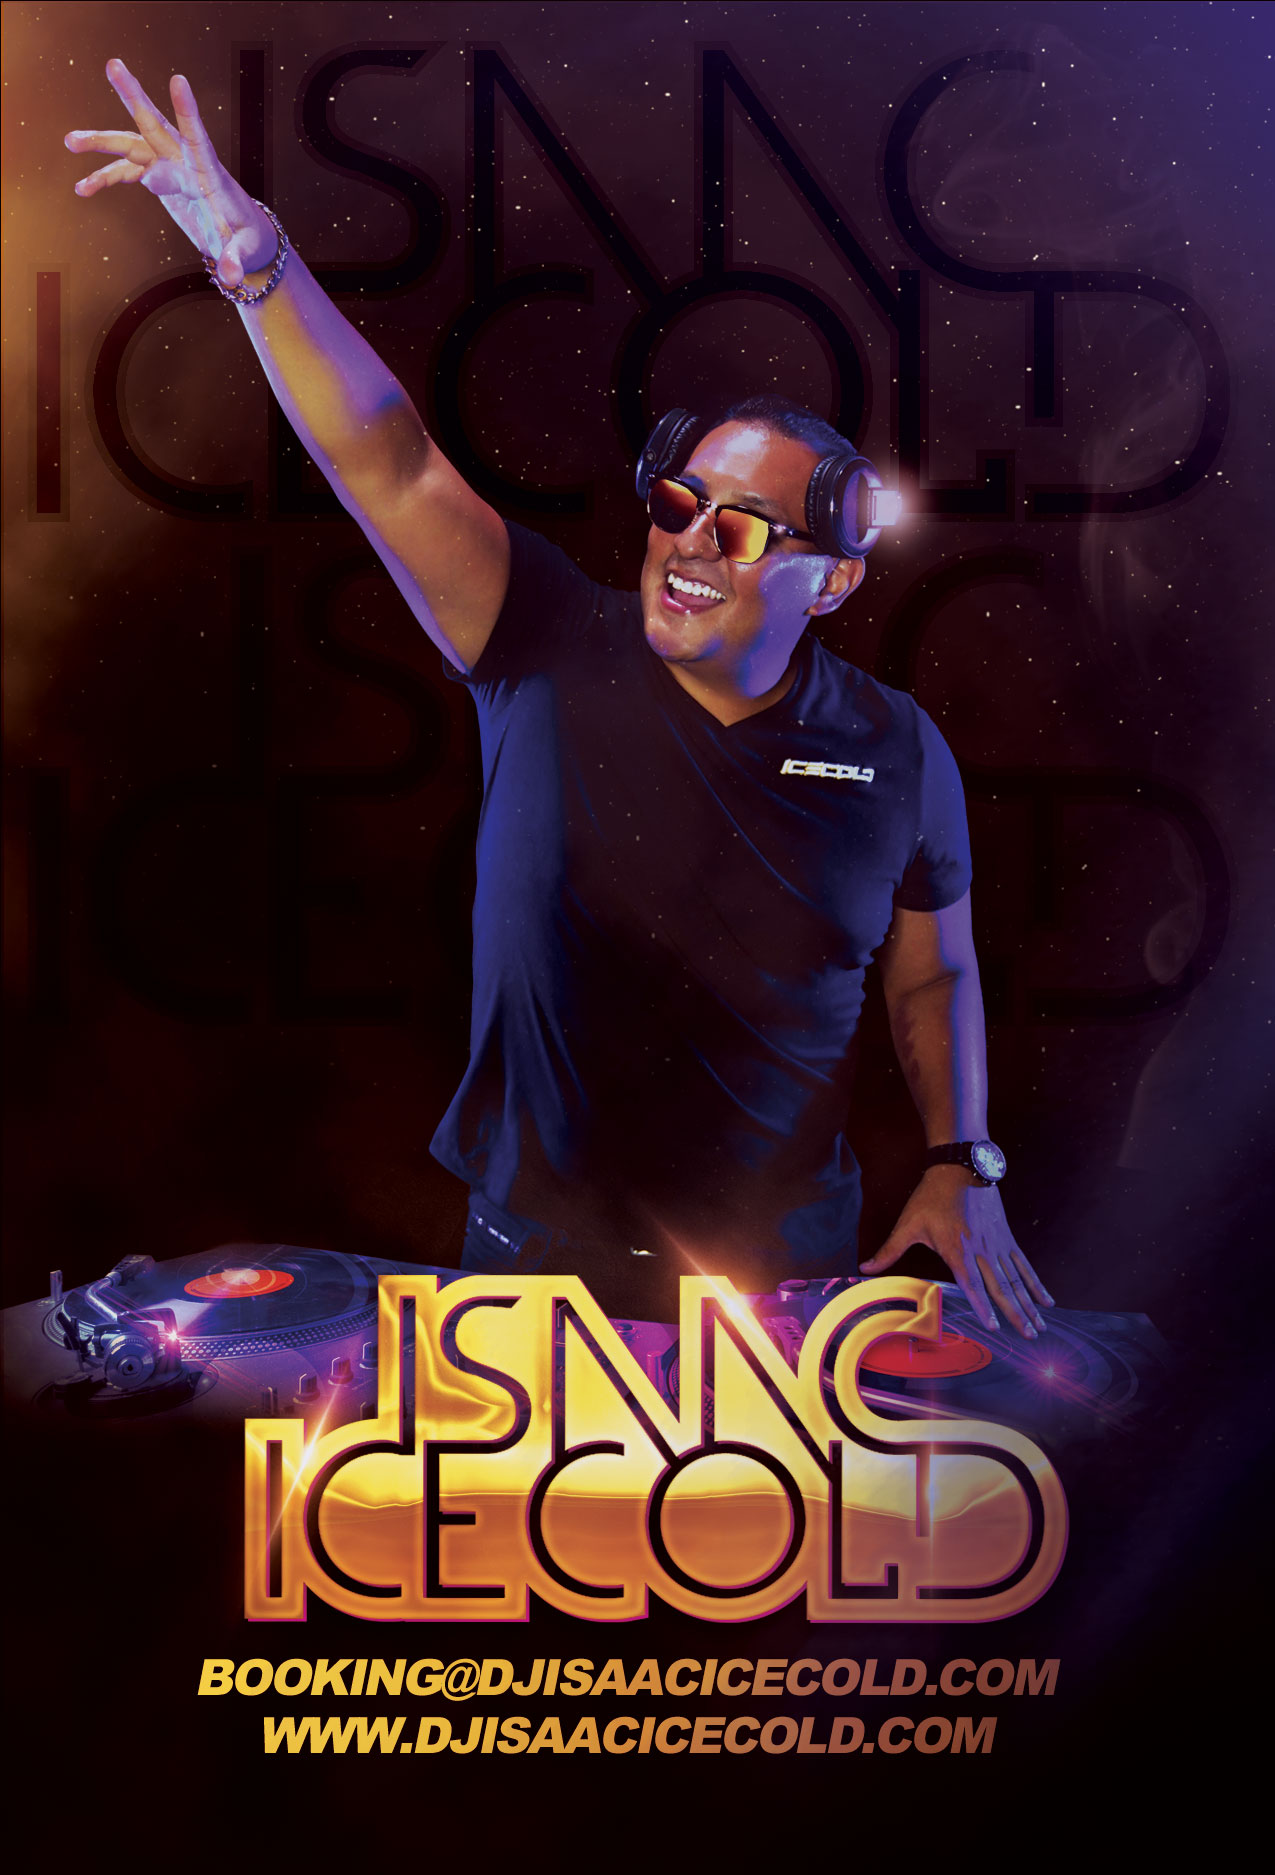 Digital and Print design for Dj Isaac Icecold